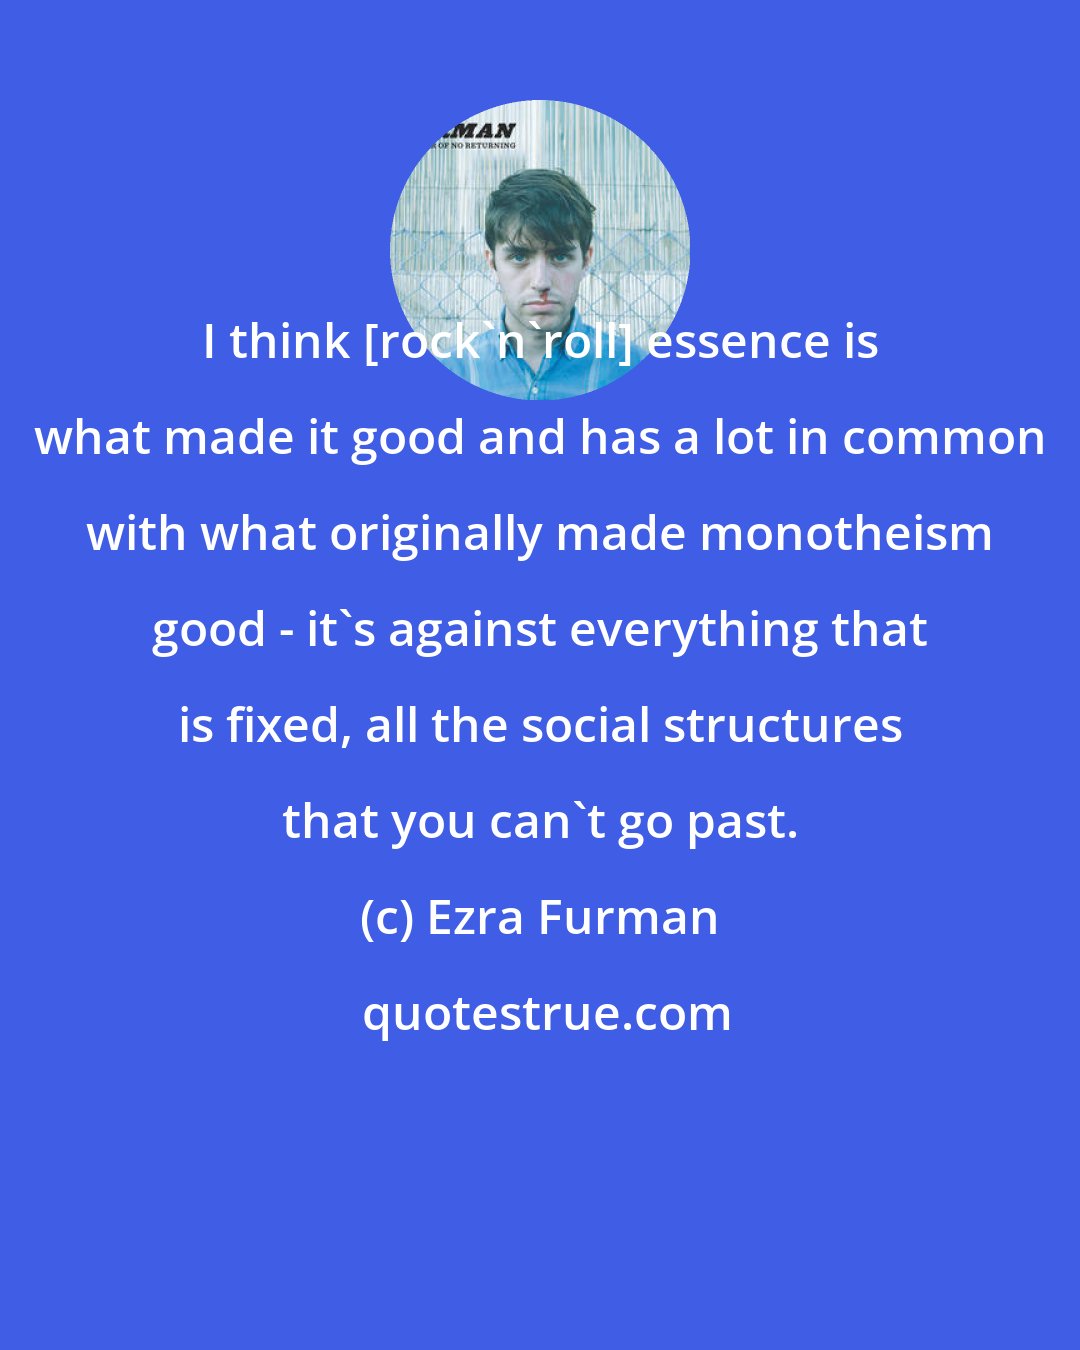 Ezra Furman: I think [rock'n'roll] essence is what made it good and has a lot in common with what originally made monotheism good - it's against everything that is fixed, all the social structures that you can't go past.